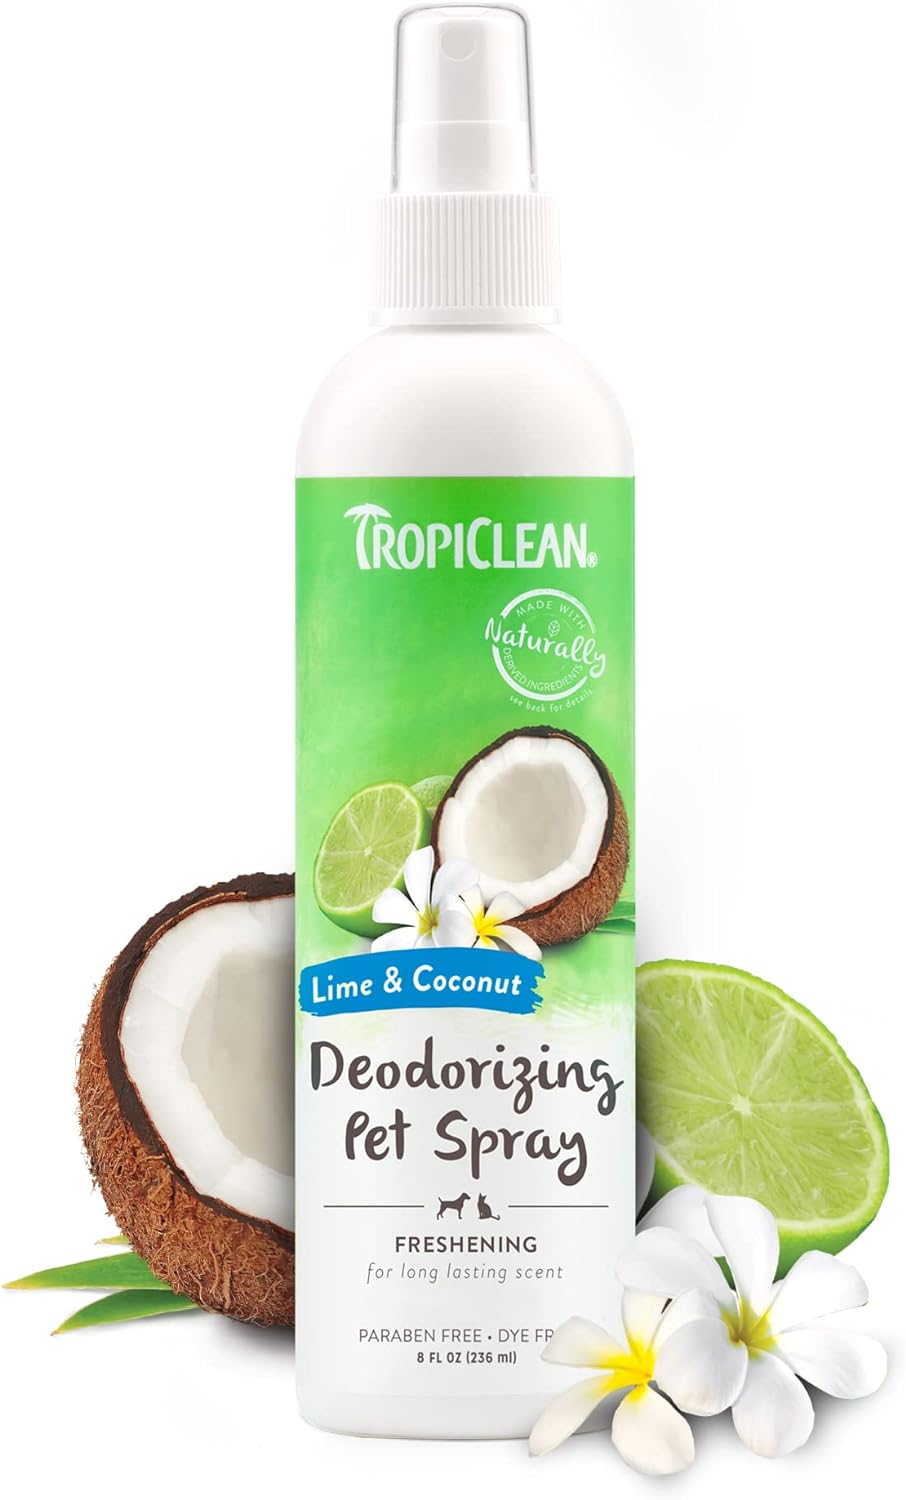 TropiClean Dog Perfume Spray Grooming Supplies - Dog Deodorant Spray for Smelly Dogs - Dog Cologne Breaks Down Odours and Deodorises Dogs and Cats - Used by Groomers - Lime & Coconut, 236ml?TRLMSP8Z